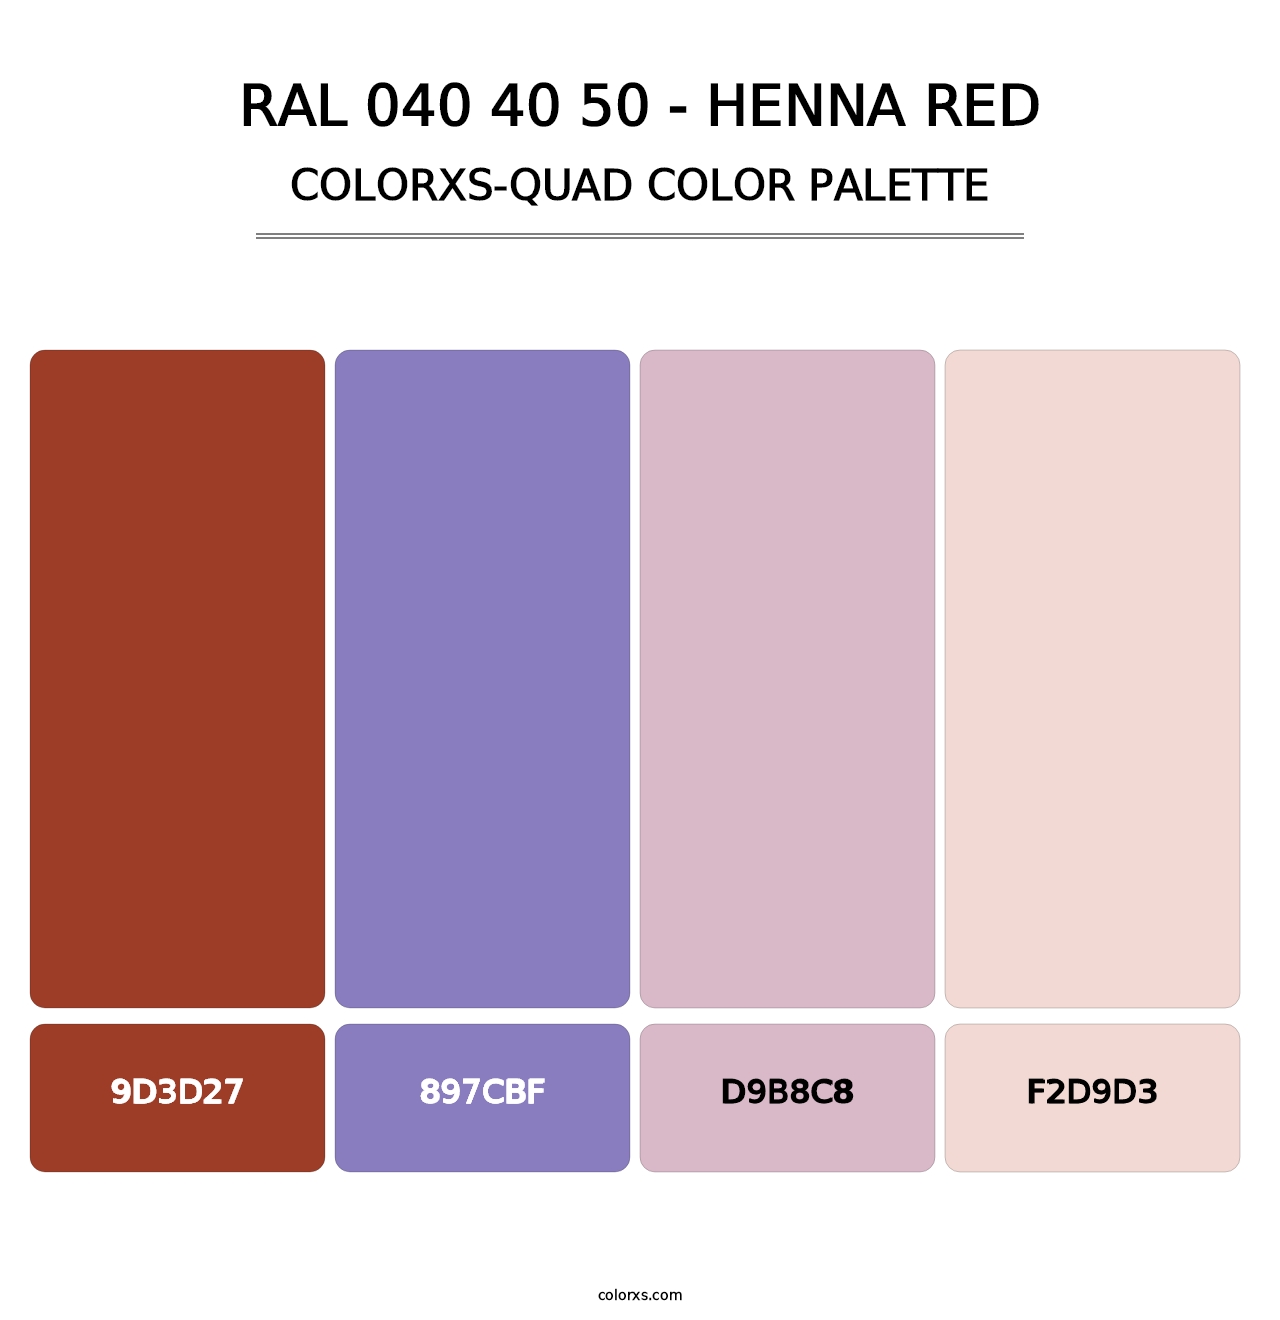 RAL 040 40 50 - Henna Red - Colorxs Quad Palette